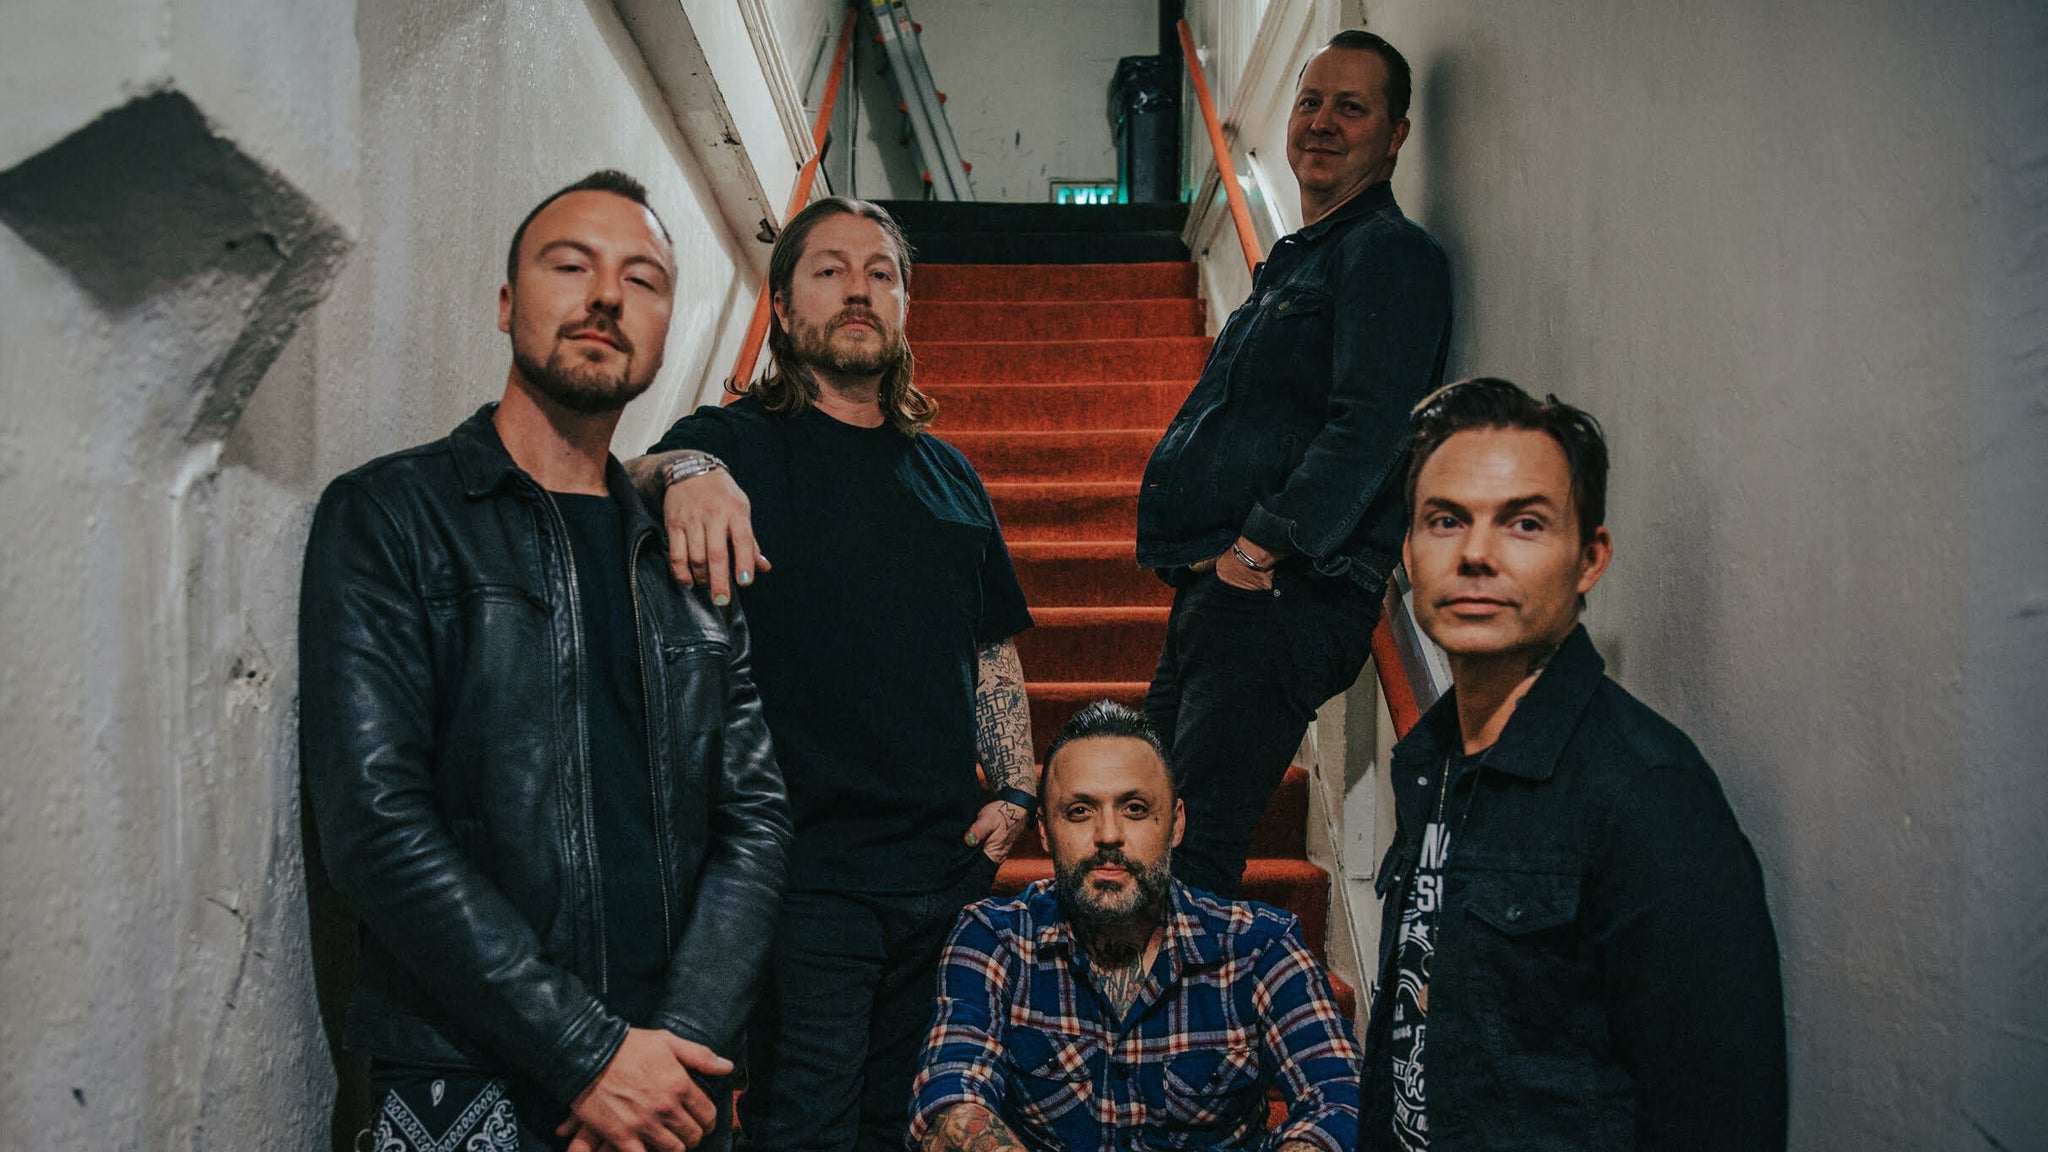 Blue October pre-sale passcode for early tickets in Harrisburg